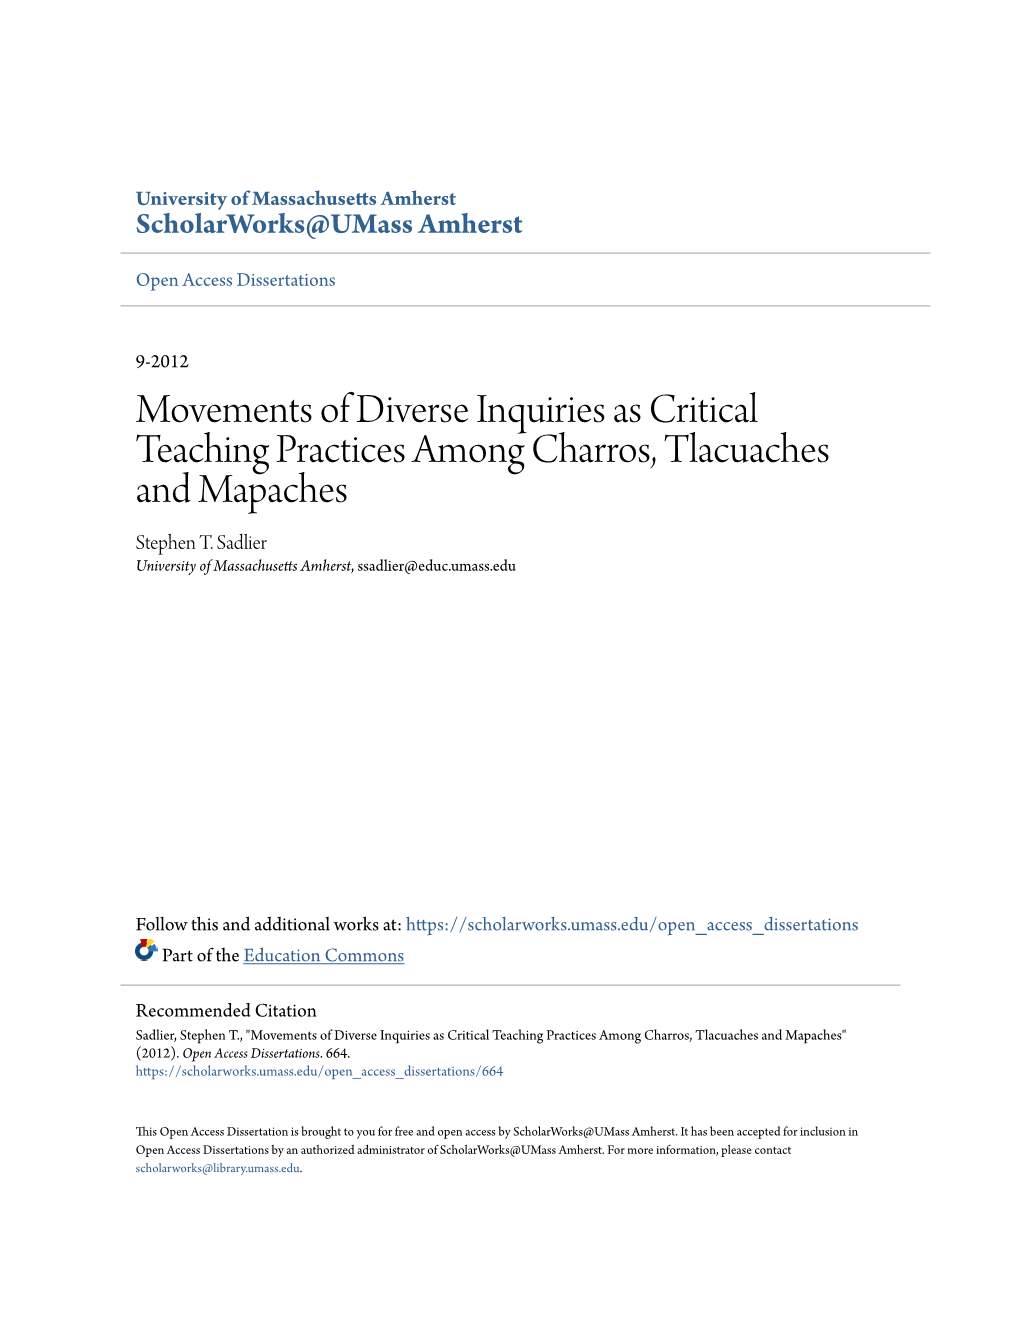 Movements of Diverse Inquiries As Critical Teaching Practices Among Charros, Tlacuaches and Mapaches Stephen T